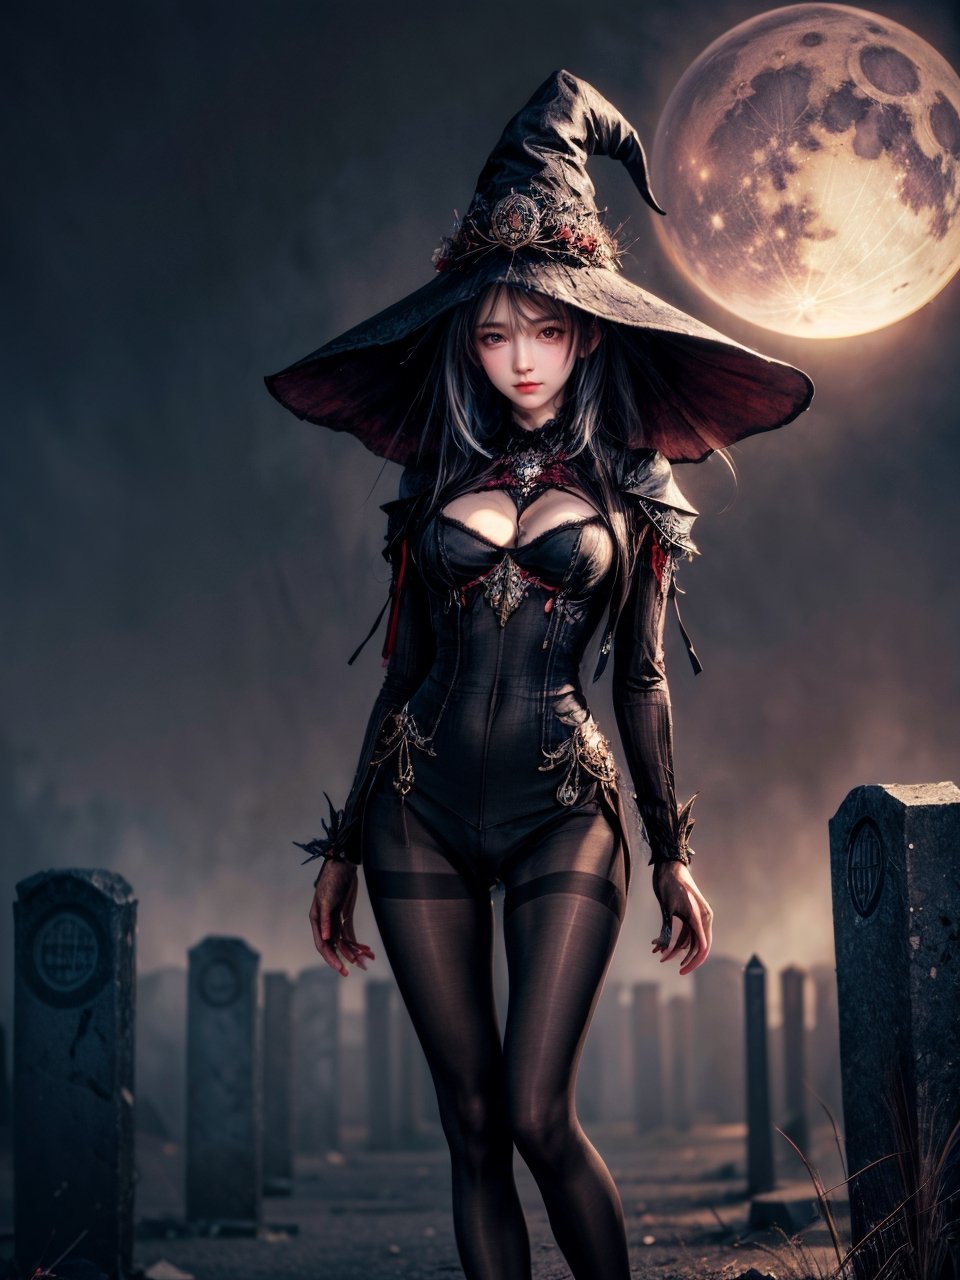 ((((((Whole_body_from_far_away)))))), (((pantyhose))), A hauntingly beautiful illustration of a witch standing in a spooky graveyard under a blood-red moon. witch hat, The scene should be cinematic with Jack-o-lantern shining. The witch should be portrayed with fine details and realistic shading. The artwork should be in a high resolution and digitally painted by renowned artists like Luis Royo and Jasmine Becket-Griffith. The overall composition should evoke a sense of mystery and enchantment.